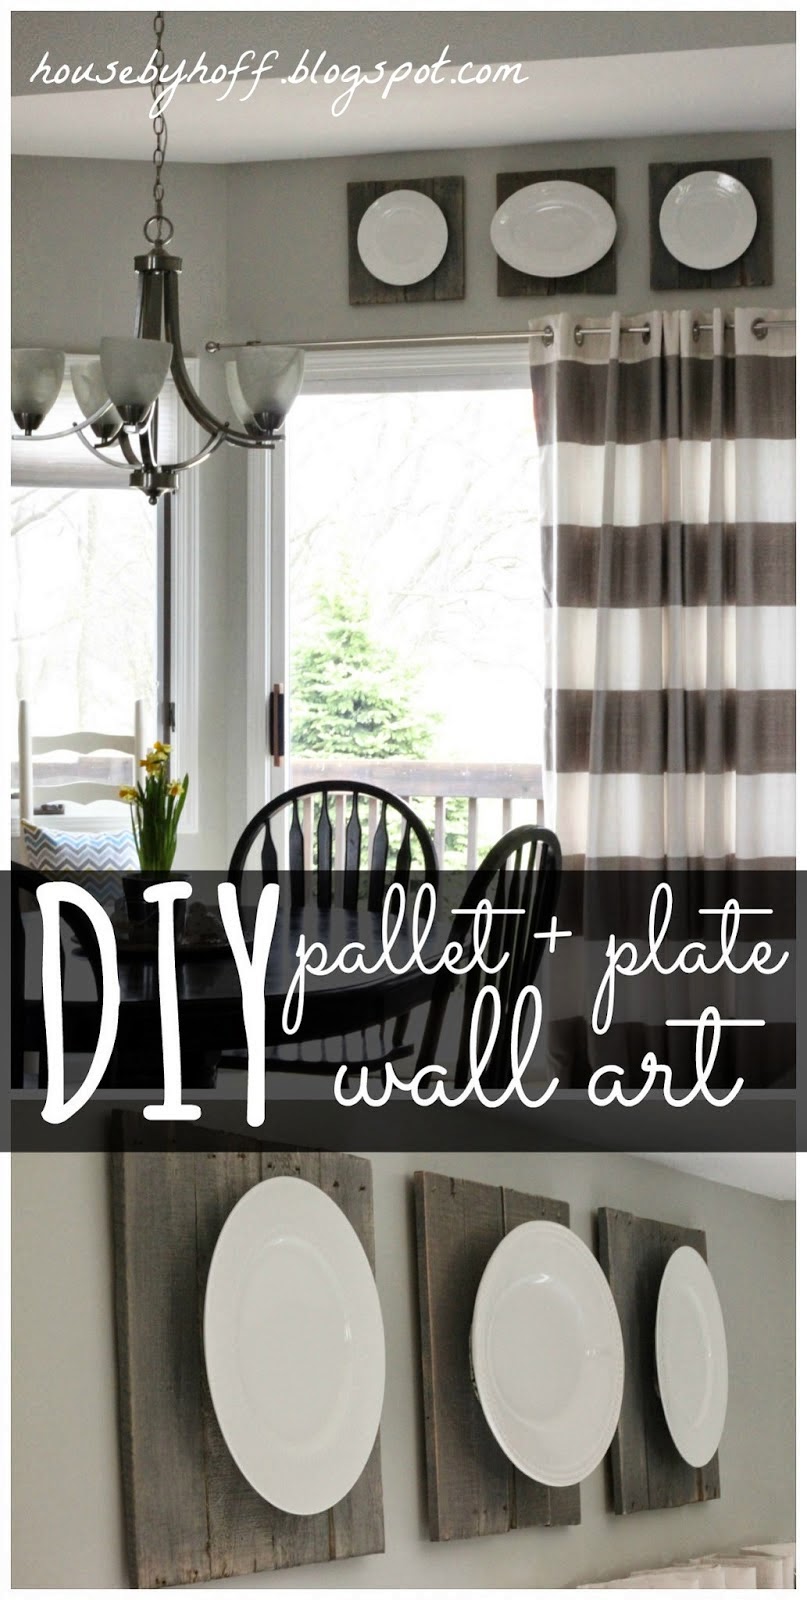 how to decorate with repurposed items via housebyhoff.com